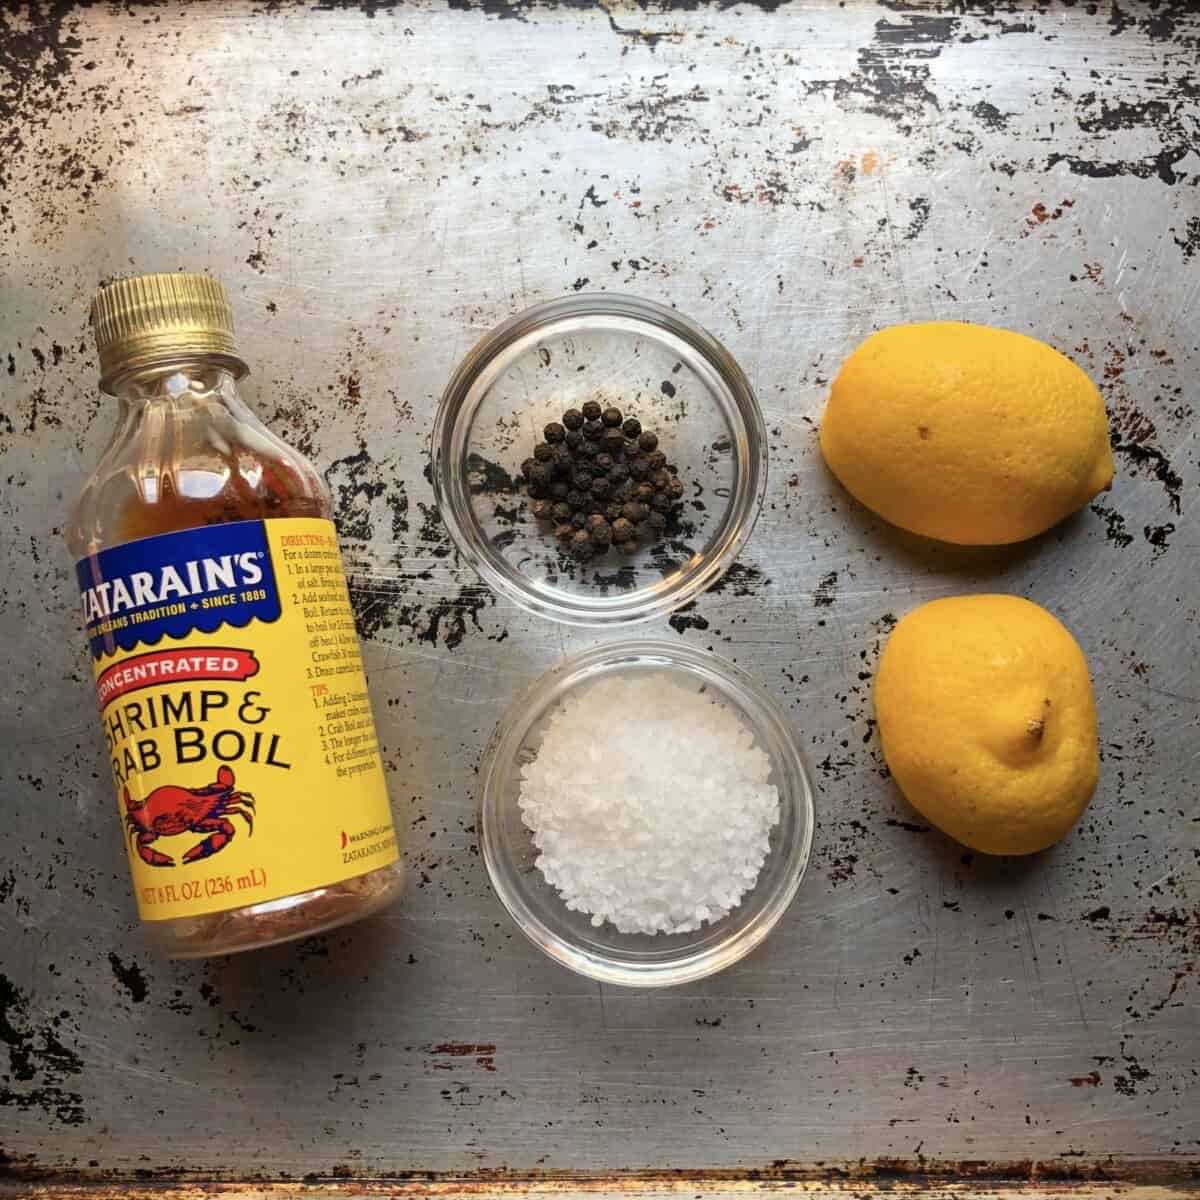 Zatarain's Liquid Crab Boil bottle next 2 small prep bowls with large grain sea salt and black peppercorns, and a halved lemon for seasoning crab for a crab boil.